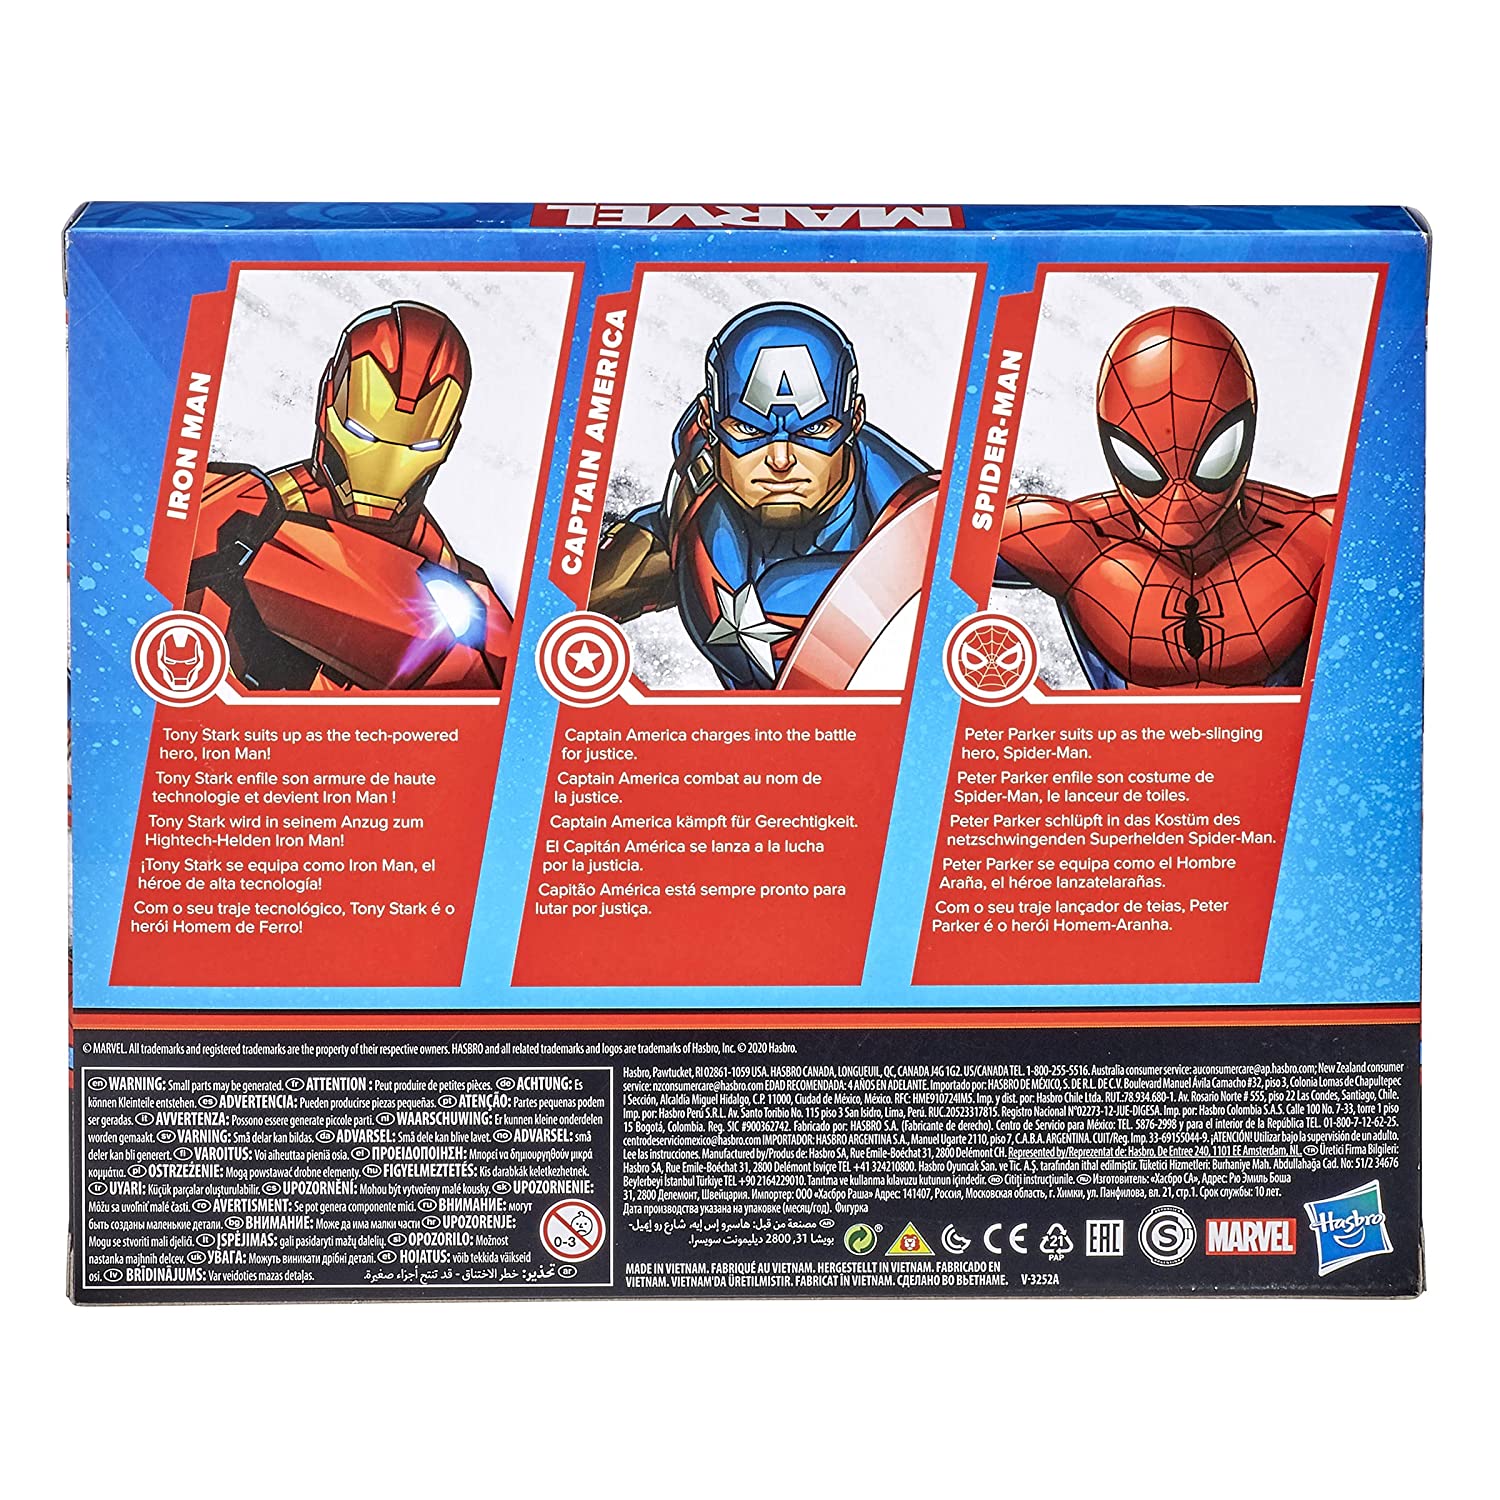 Marvel 6-inch Scale Iron Man, Spider-Man, Captain America Action Figure Toy Pack of 3 for Kids Ages 4 and Up